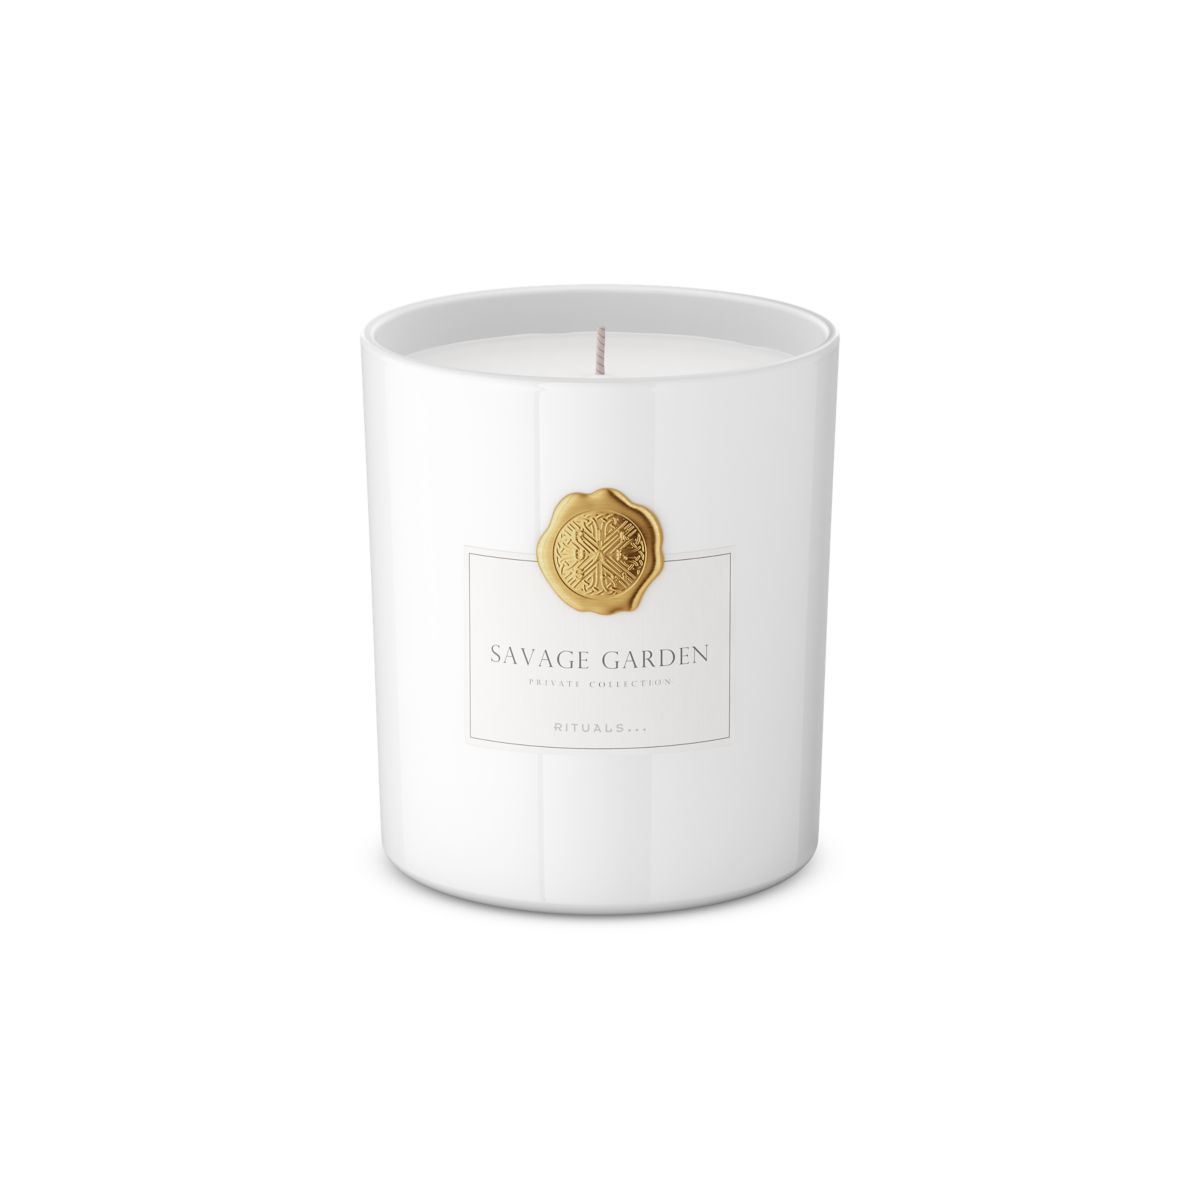 Rituals Luxury Scented Candle - Clary Sage